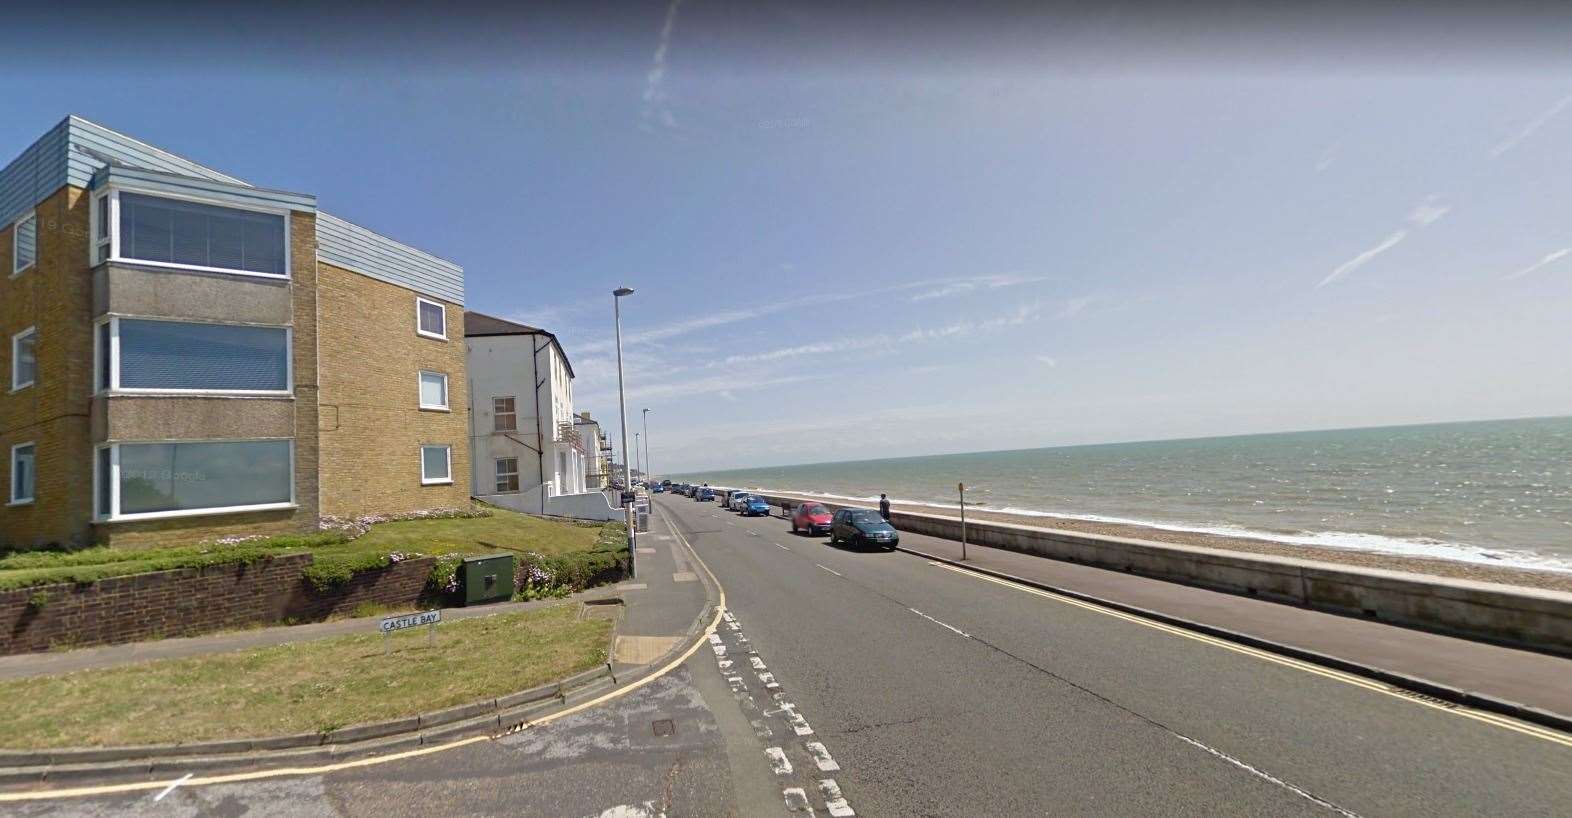 The incident happened in The Esplanade, Sandgate. Picture: Google